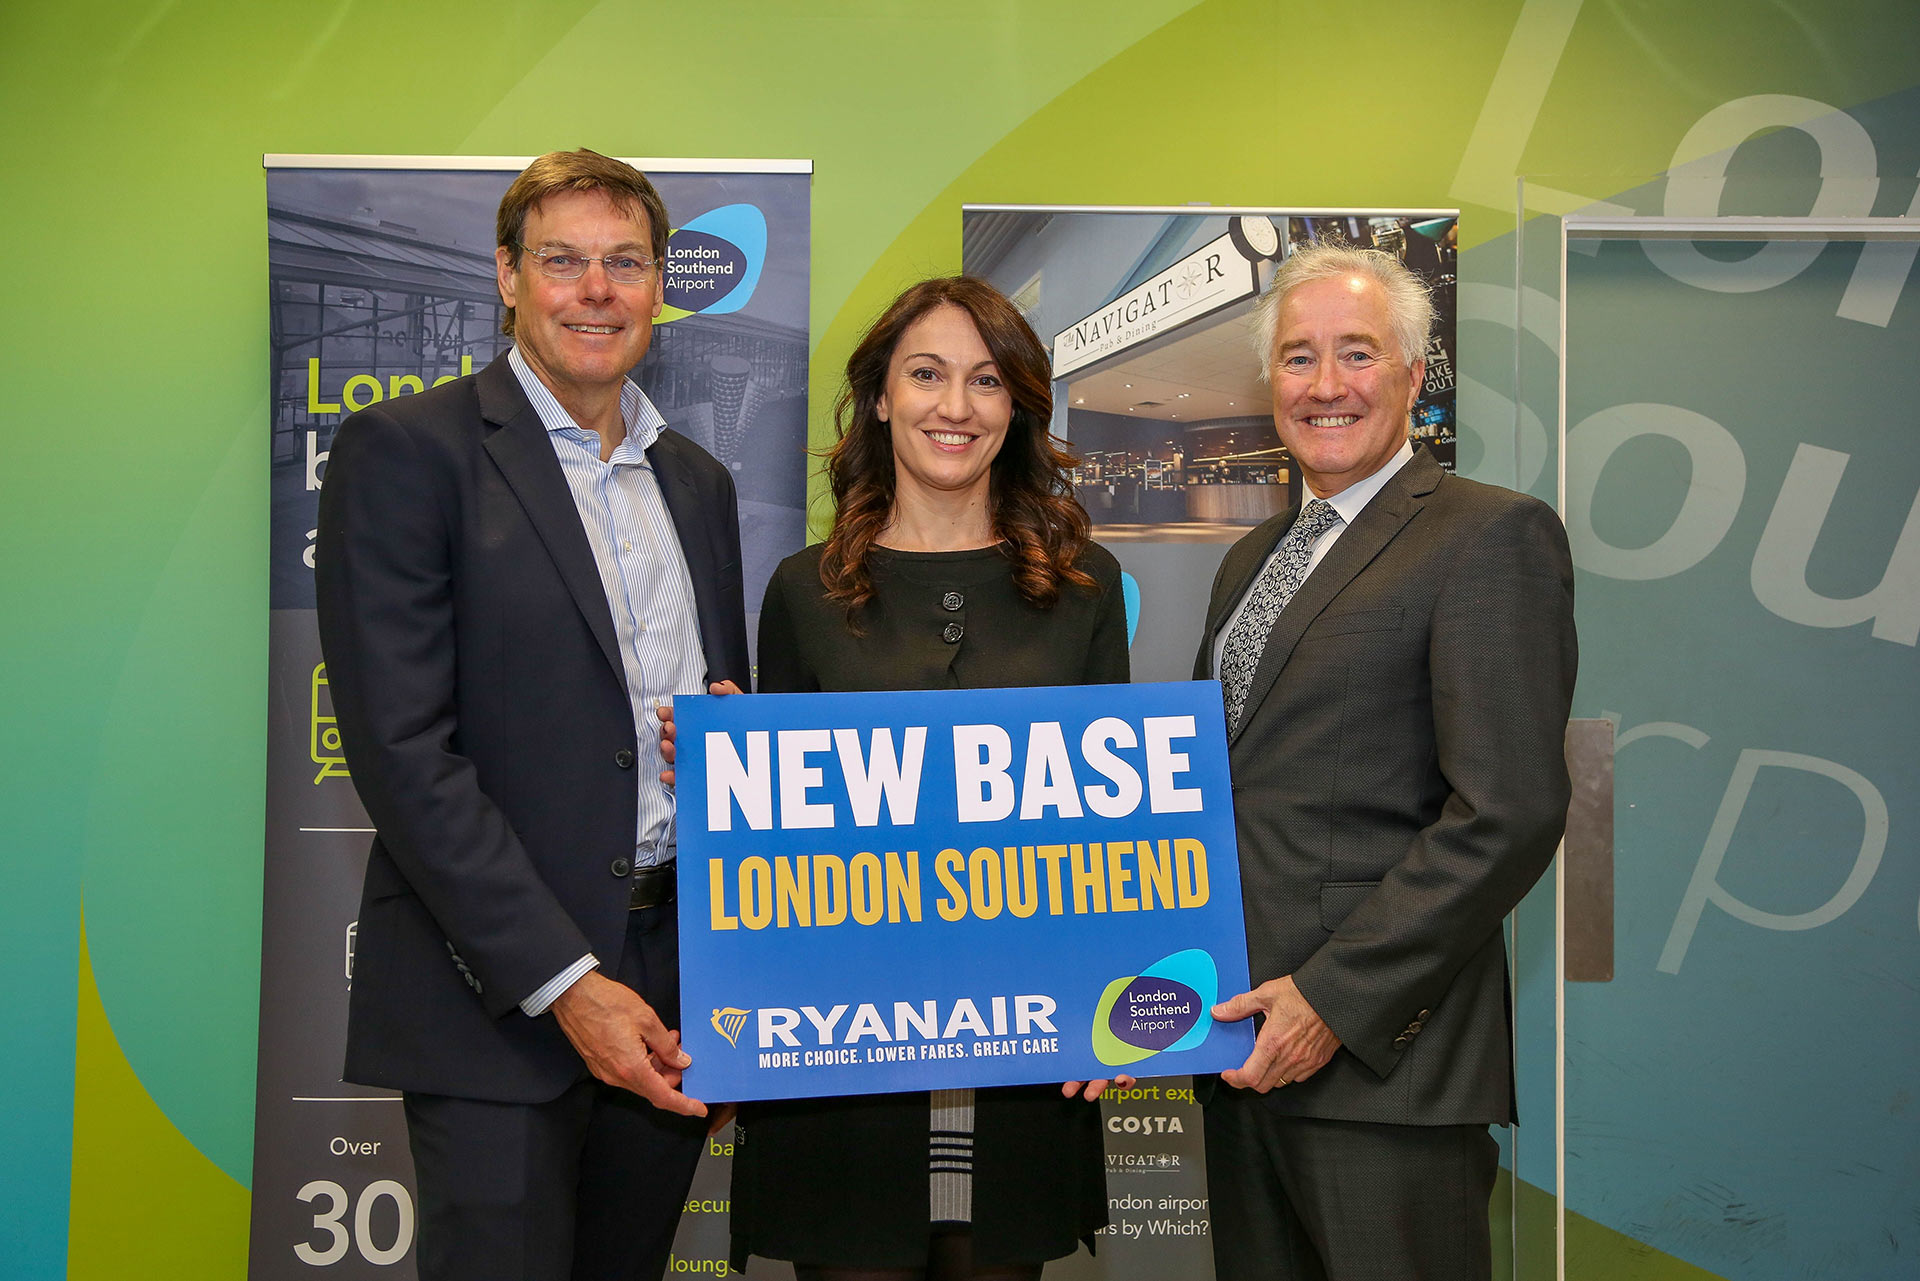 Ryanair Opens London Southend Base  3 Aircraft, 14 Routes & 1m Customers